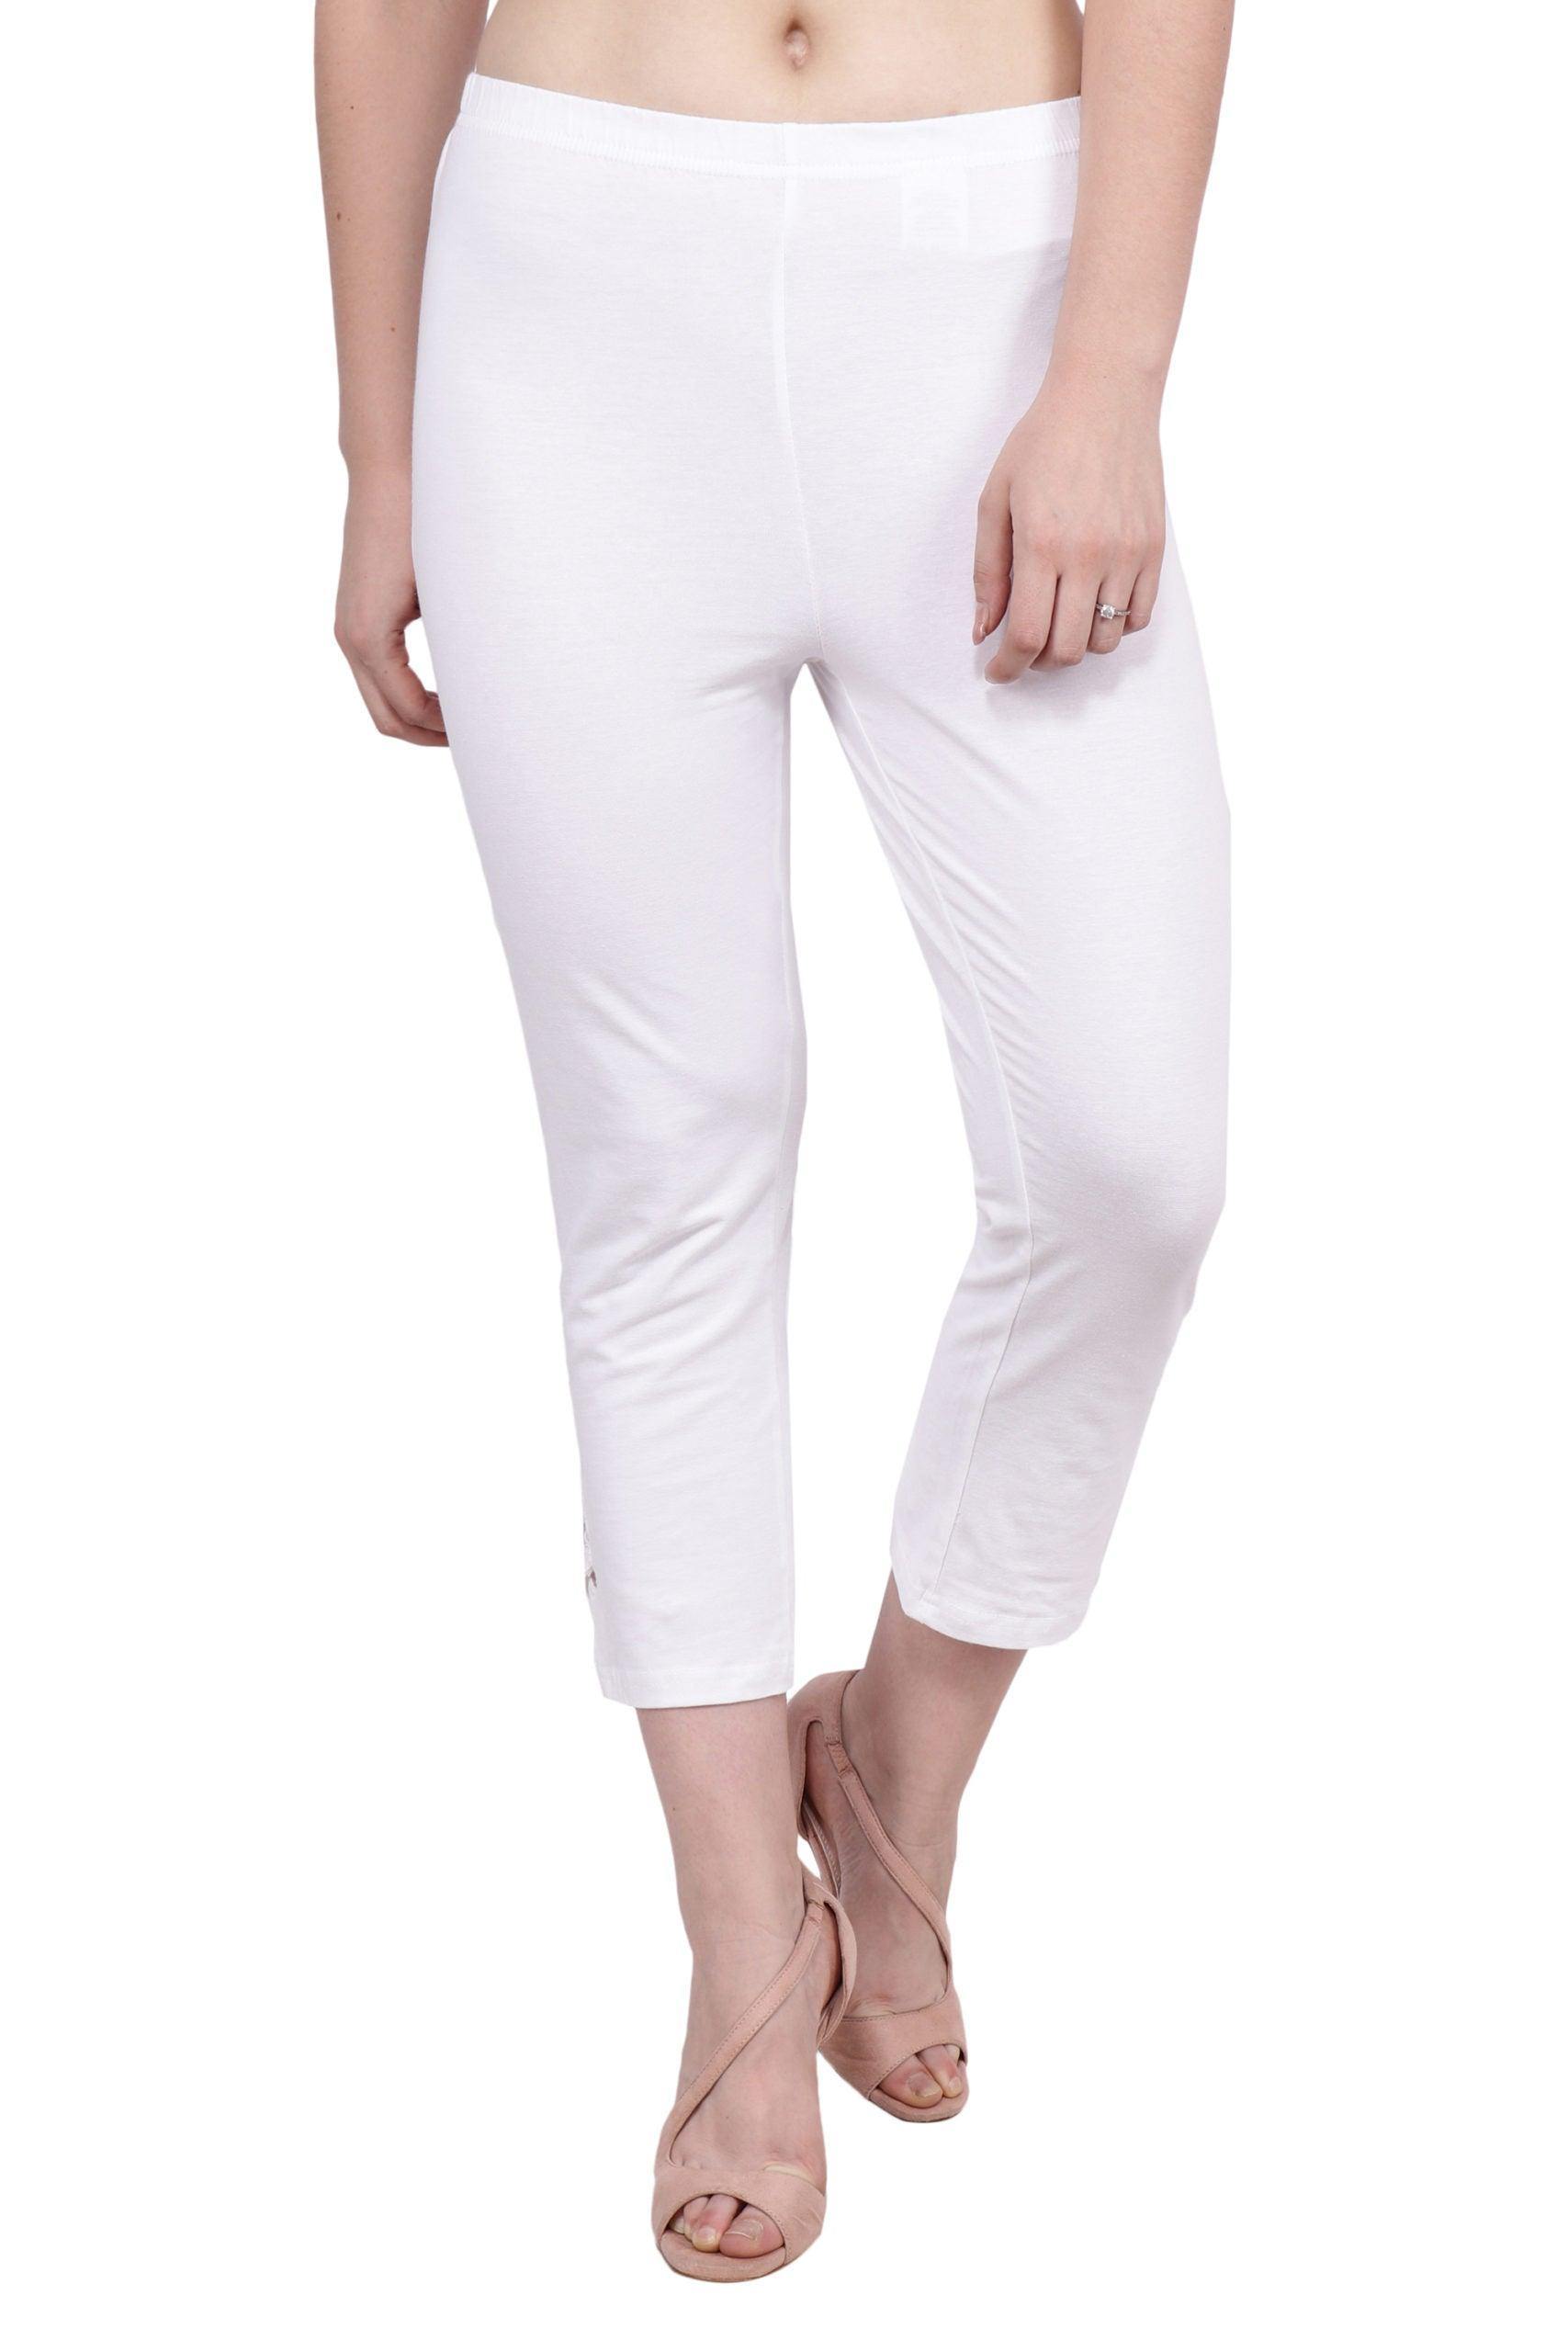 Comfortable Cotton Elastane Leggings for Casual/Formal Occasions